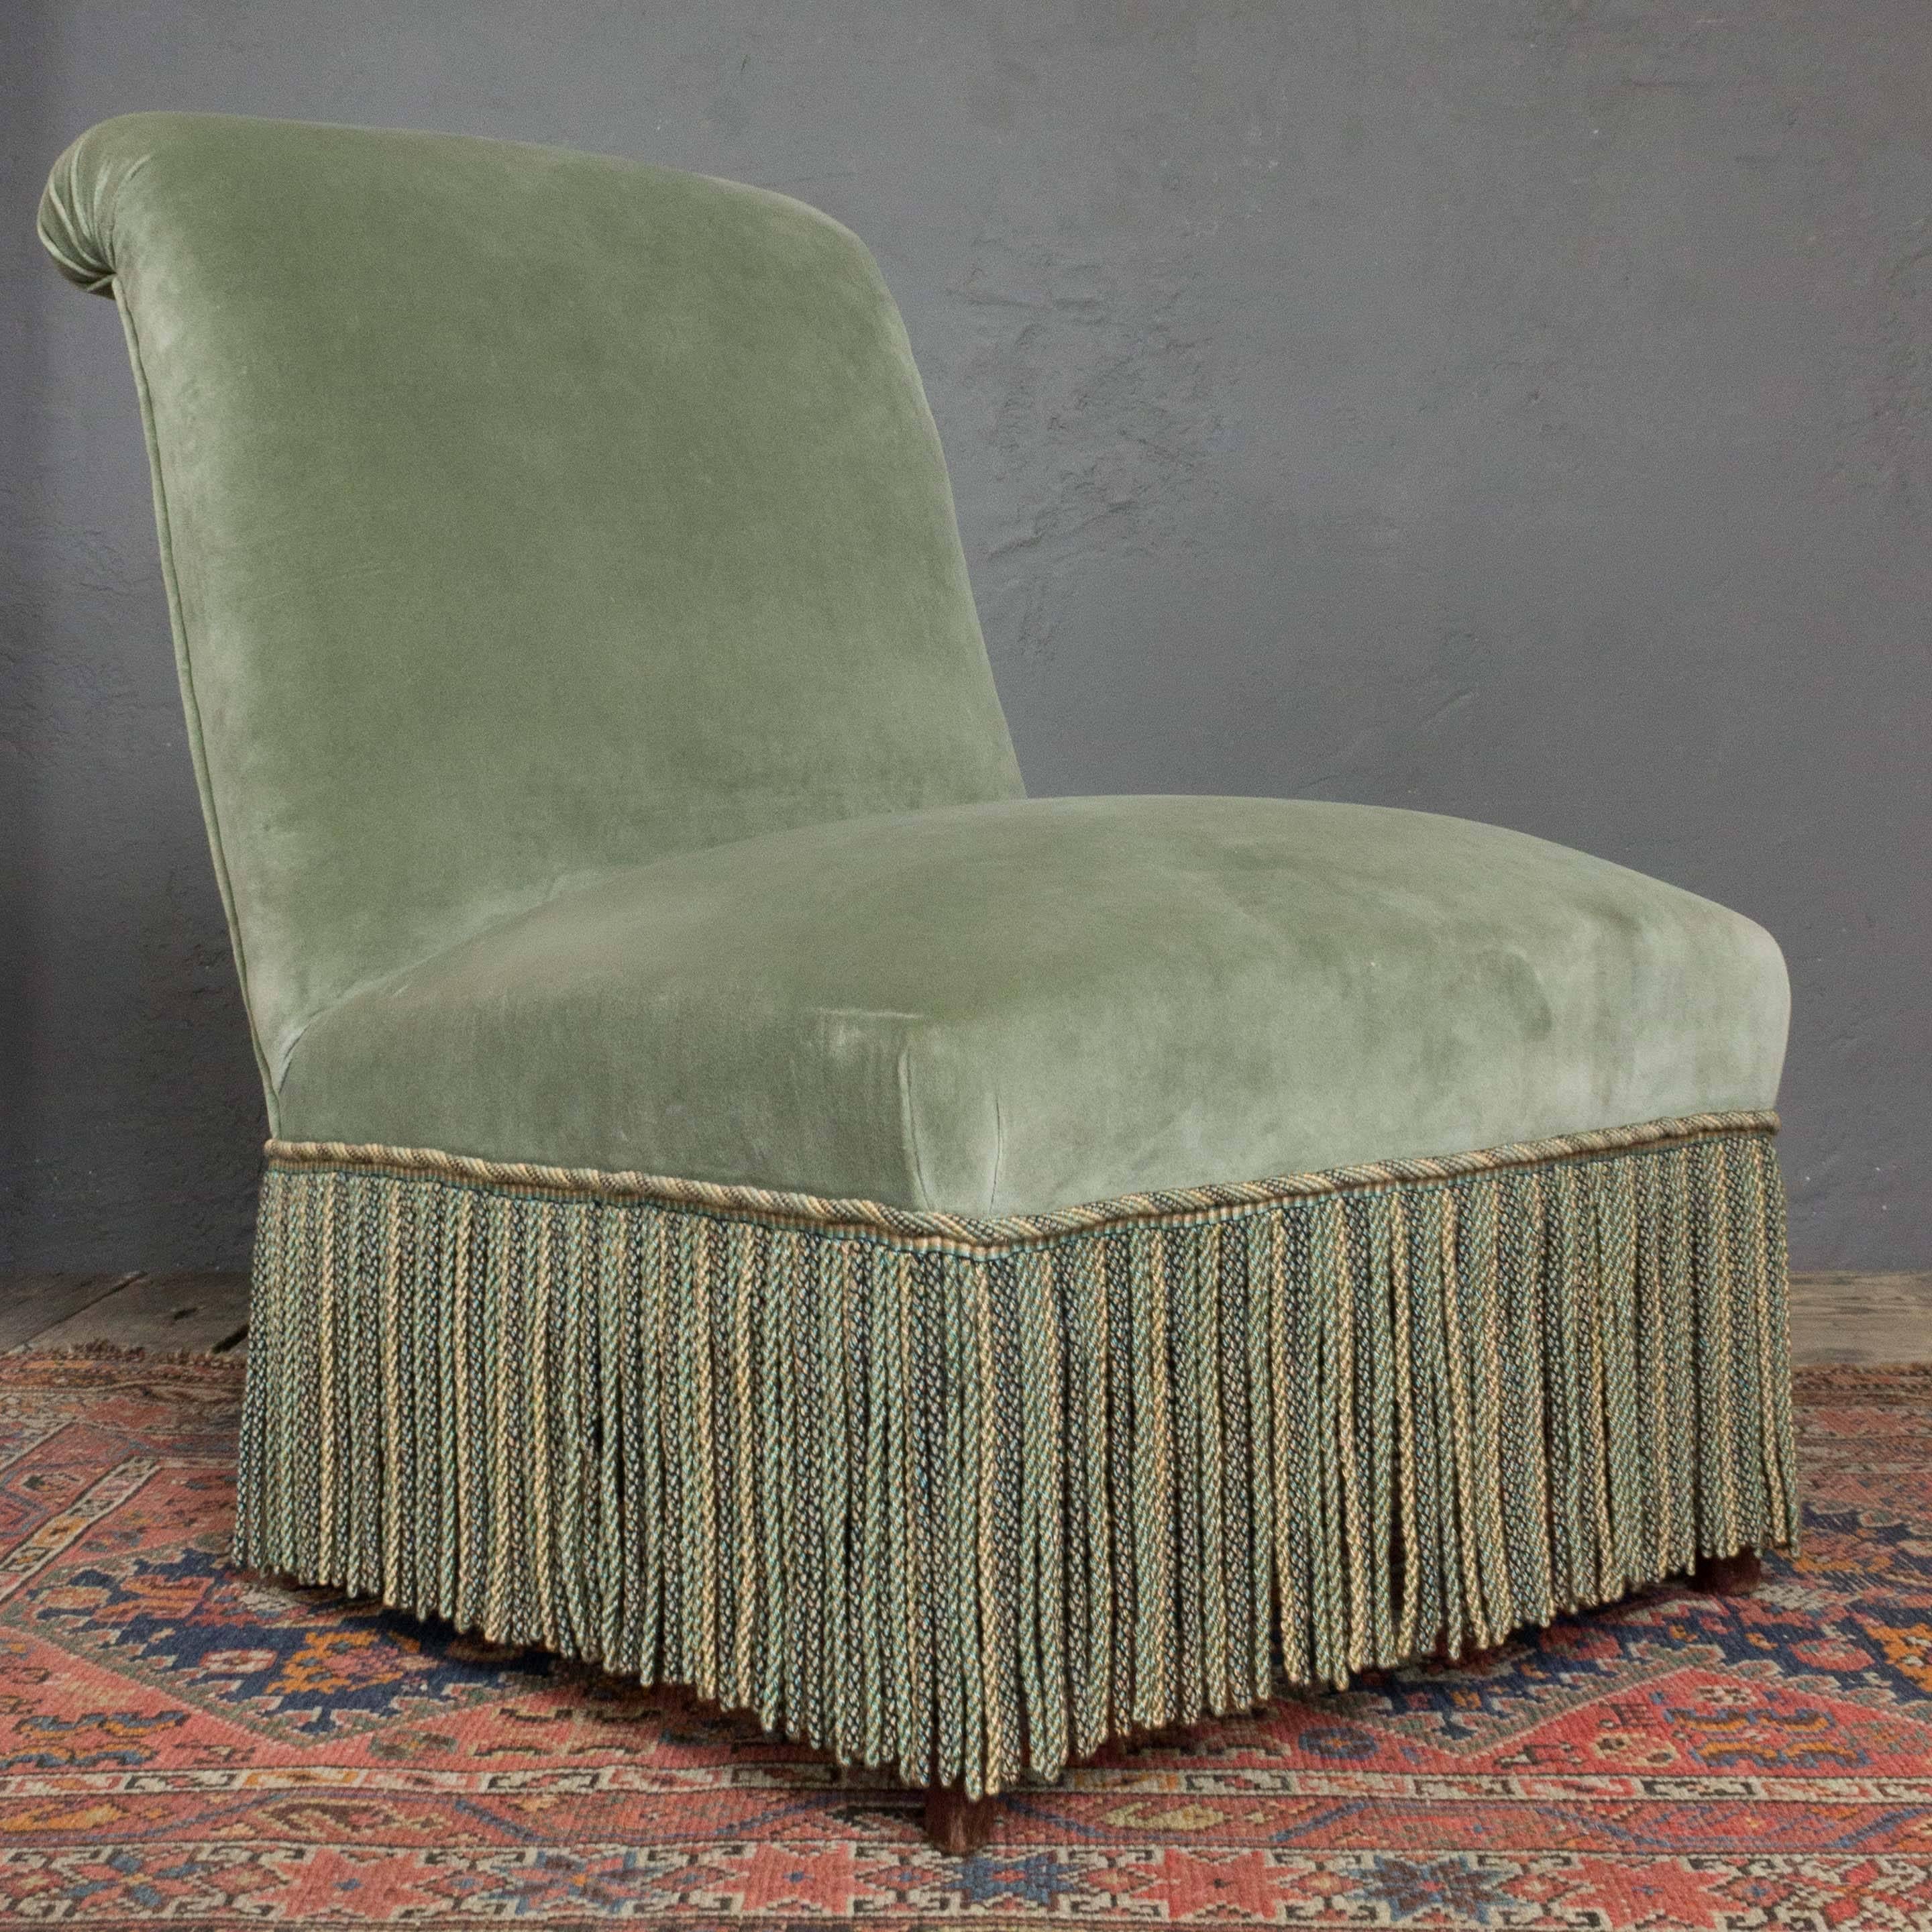 Handsome pair of Napoleon III slipper chairs in a soft olive green velvet with bullion fringe.